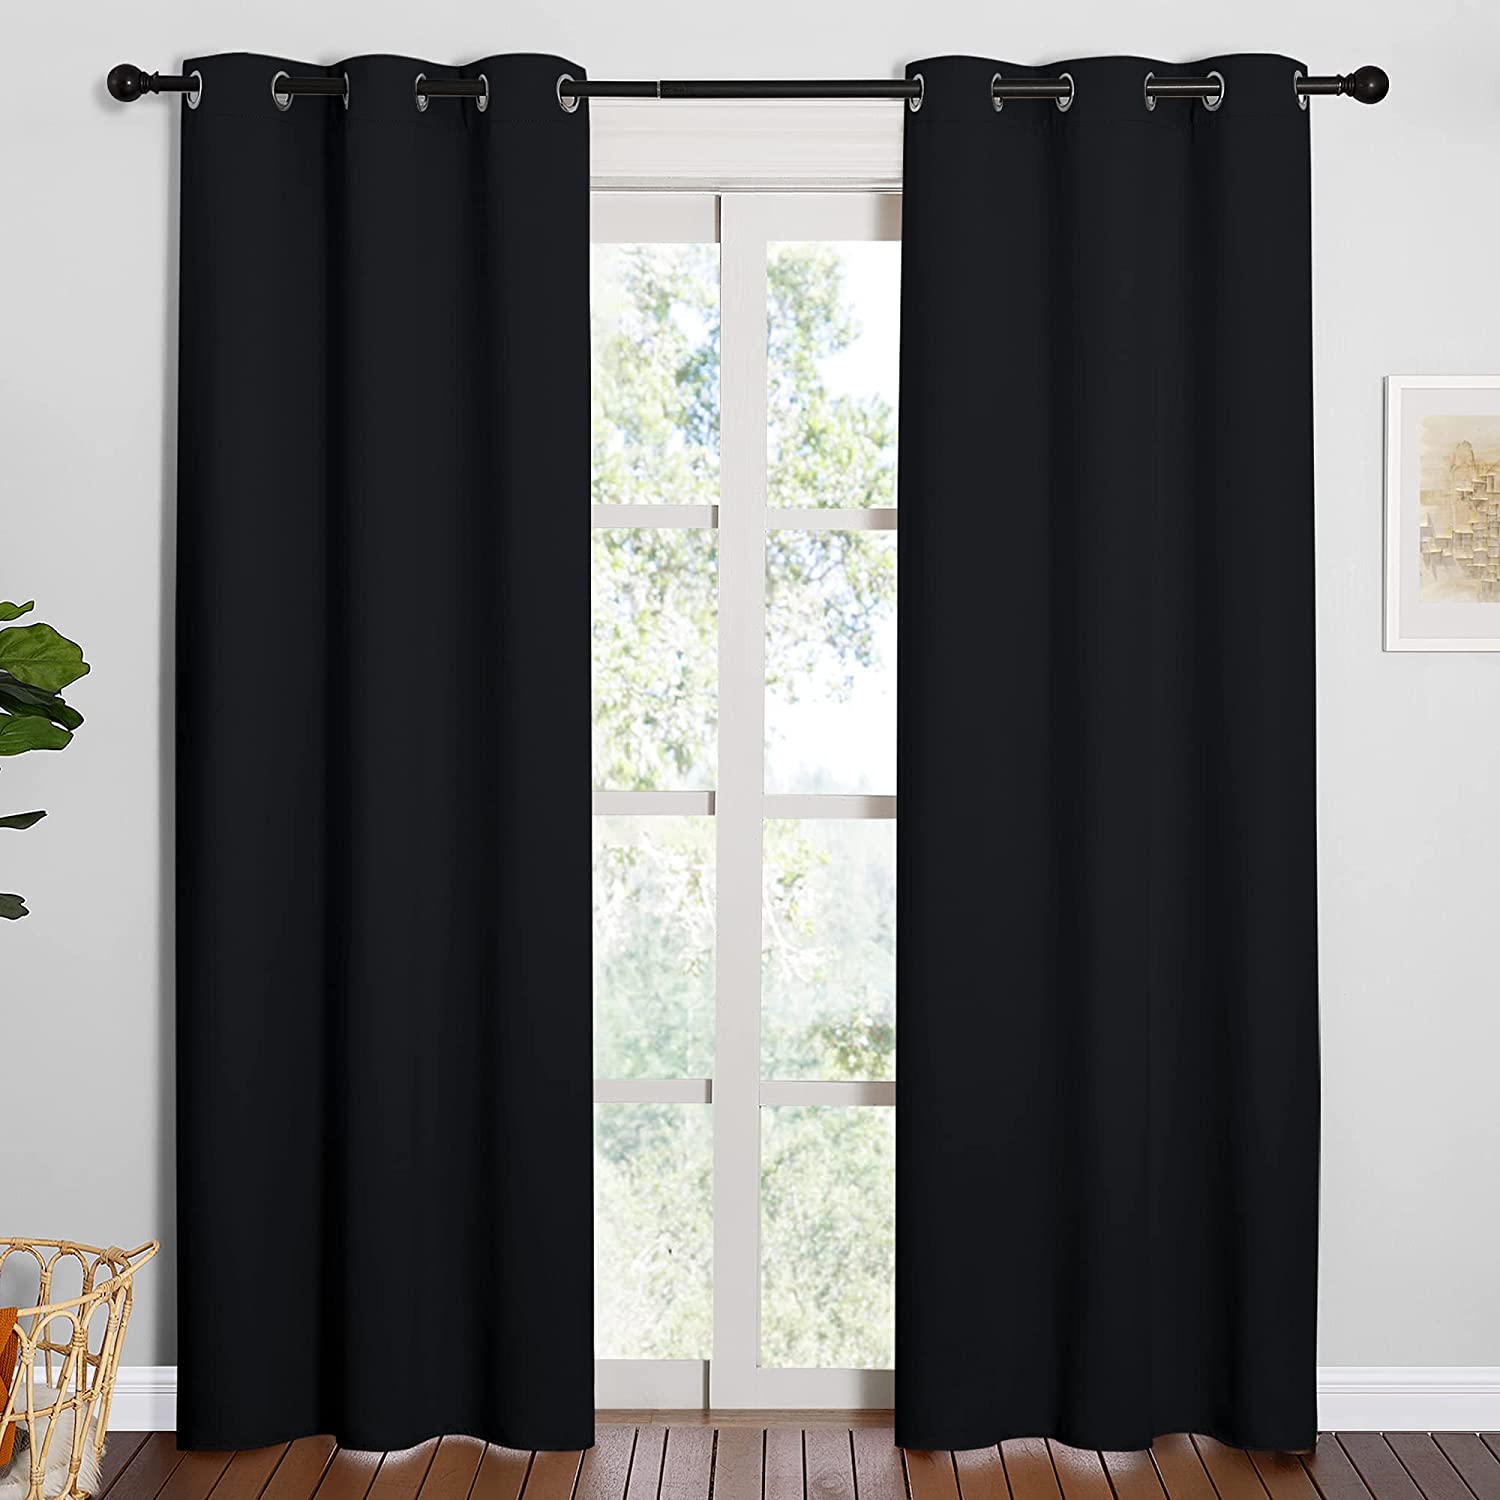 Deals Of The Week Grommet Thermal Insulated Blackout Curtains For Living Room 2 Panels KGORGE Store